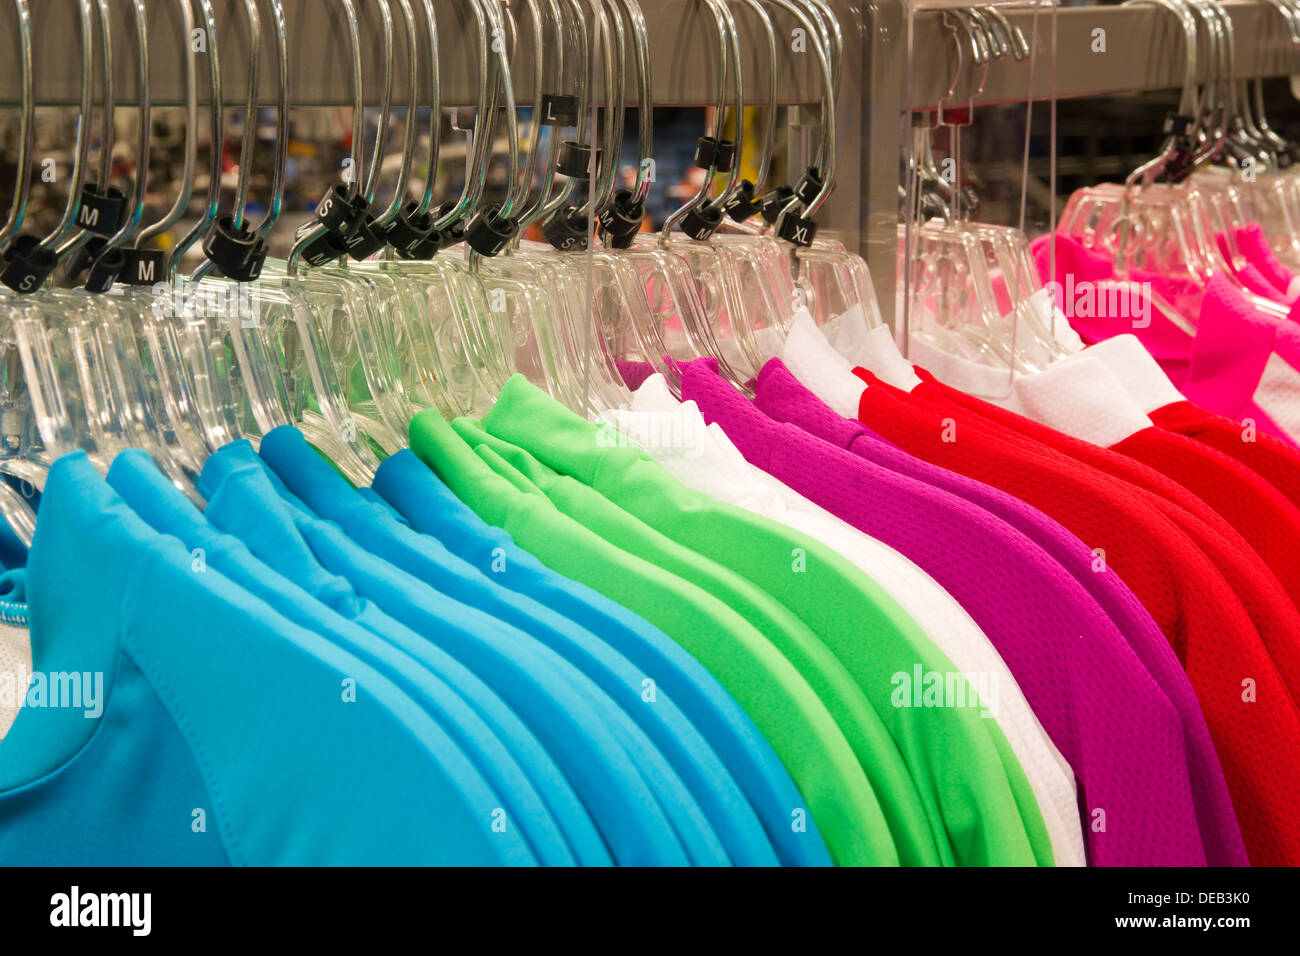 Colorful Shirt Hangers Sale Department Stores Stock Photo by  ©piyaphunjun.gmail.com 231712352